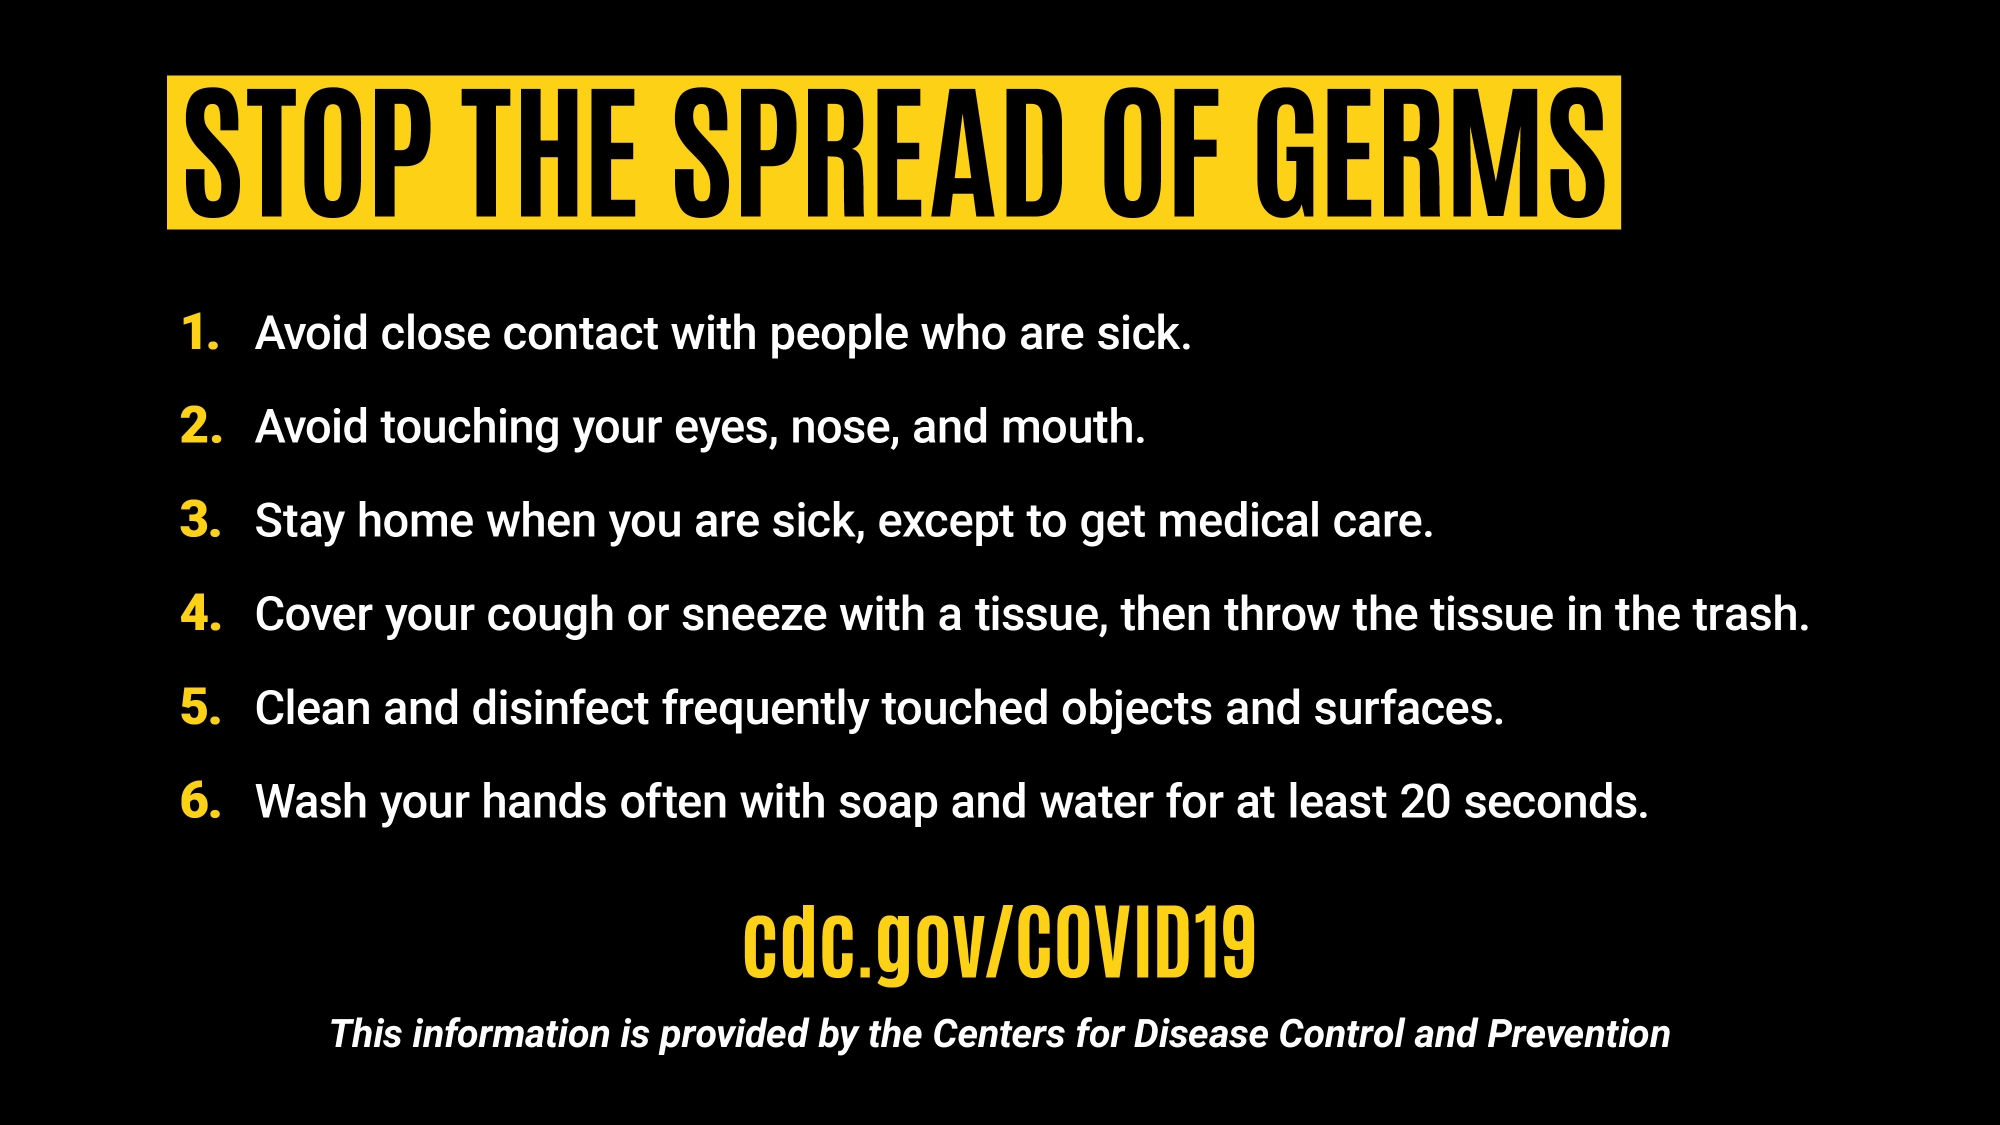 Stop the spread of germs visit cdc.gov/covid19